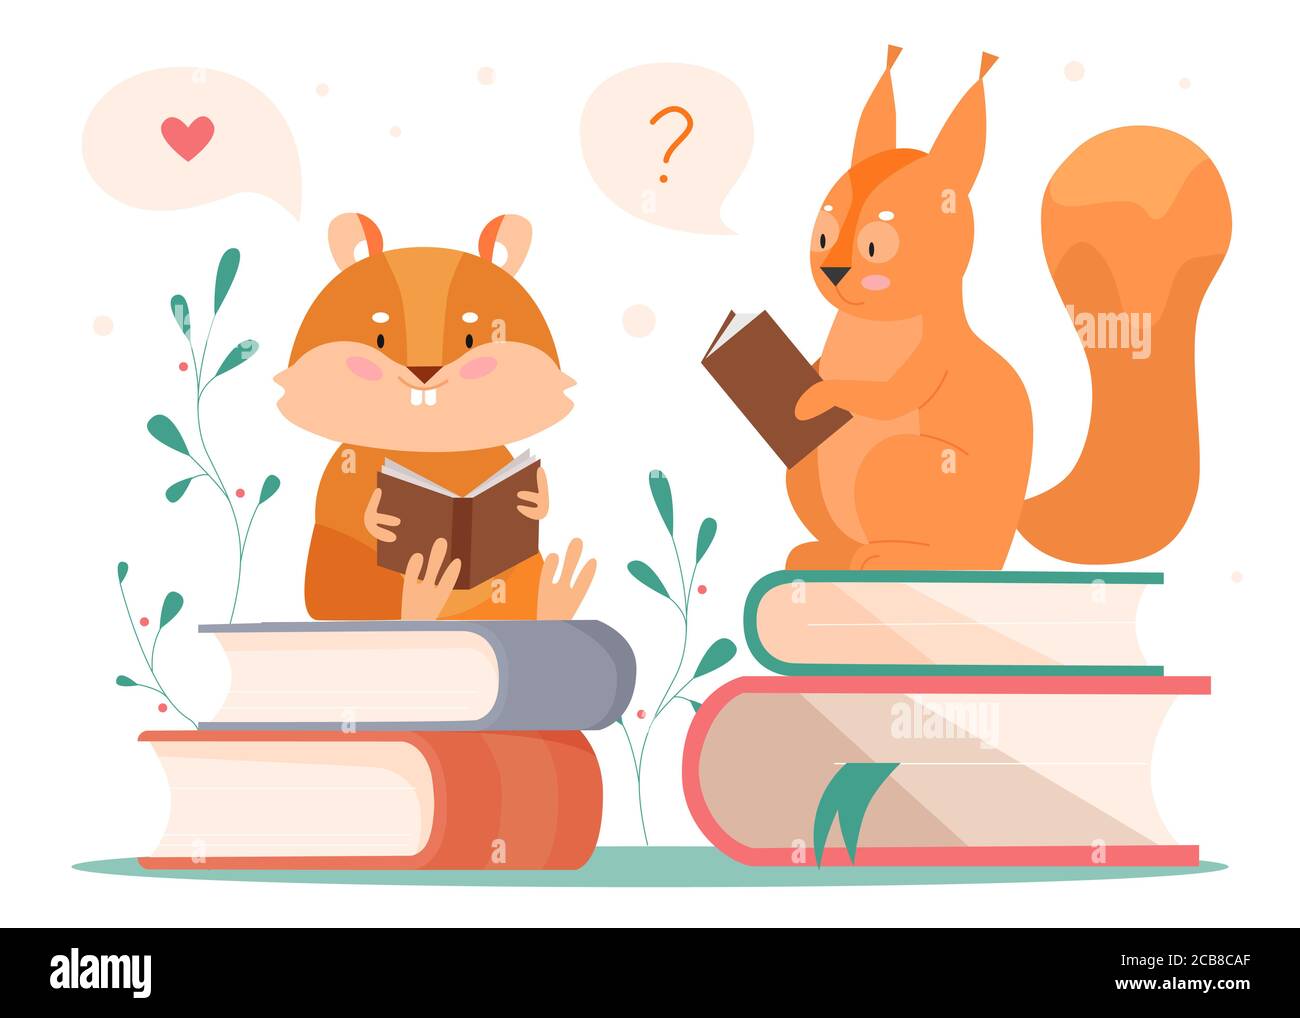 Animals reading vector illustration. Cartoon flat clever beaver and squirrel booklover reader characters sitting on books stack, reading storybook and thinking, animalistic concept isolated on white Stock Vector